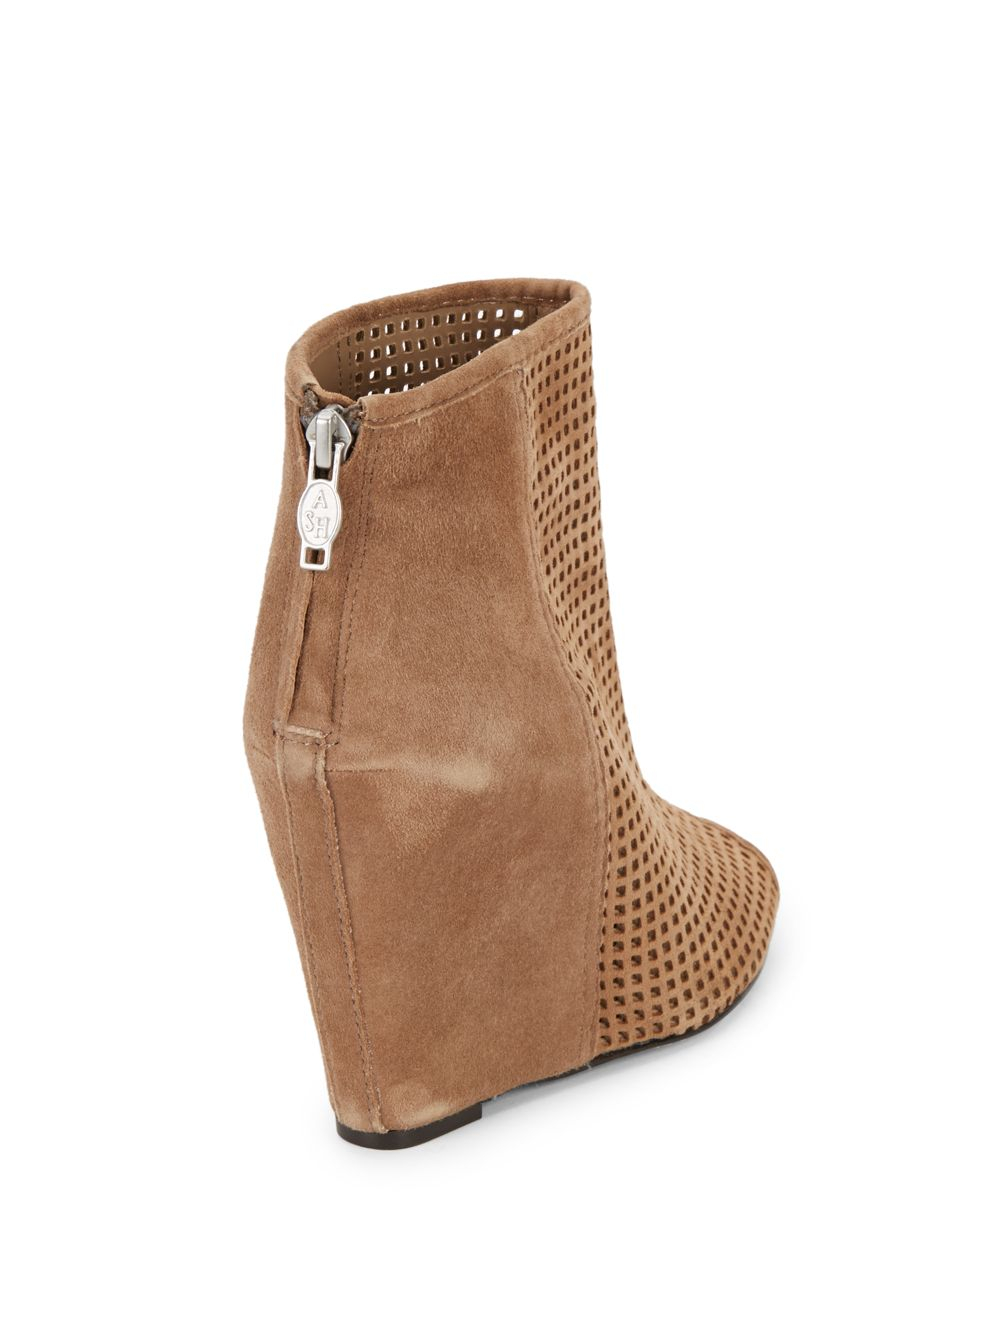 Ash June Perforated Suede Peep-Toe Wedge Ankle Boot in Brown | Lyst